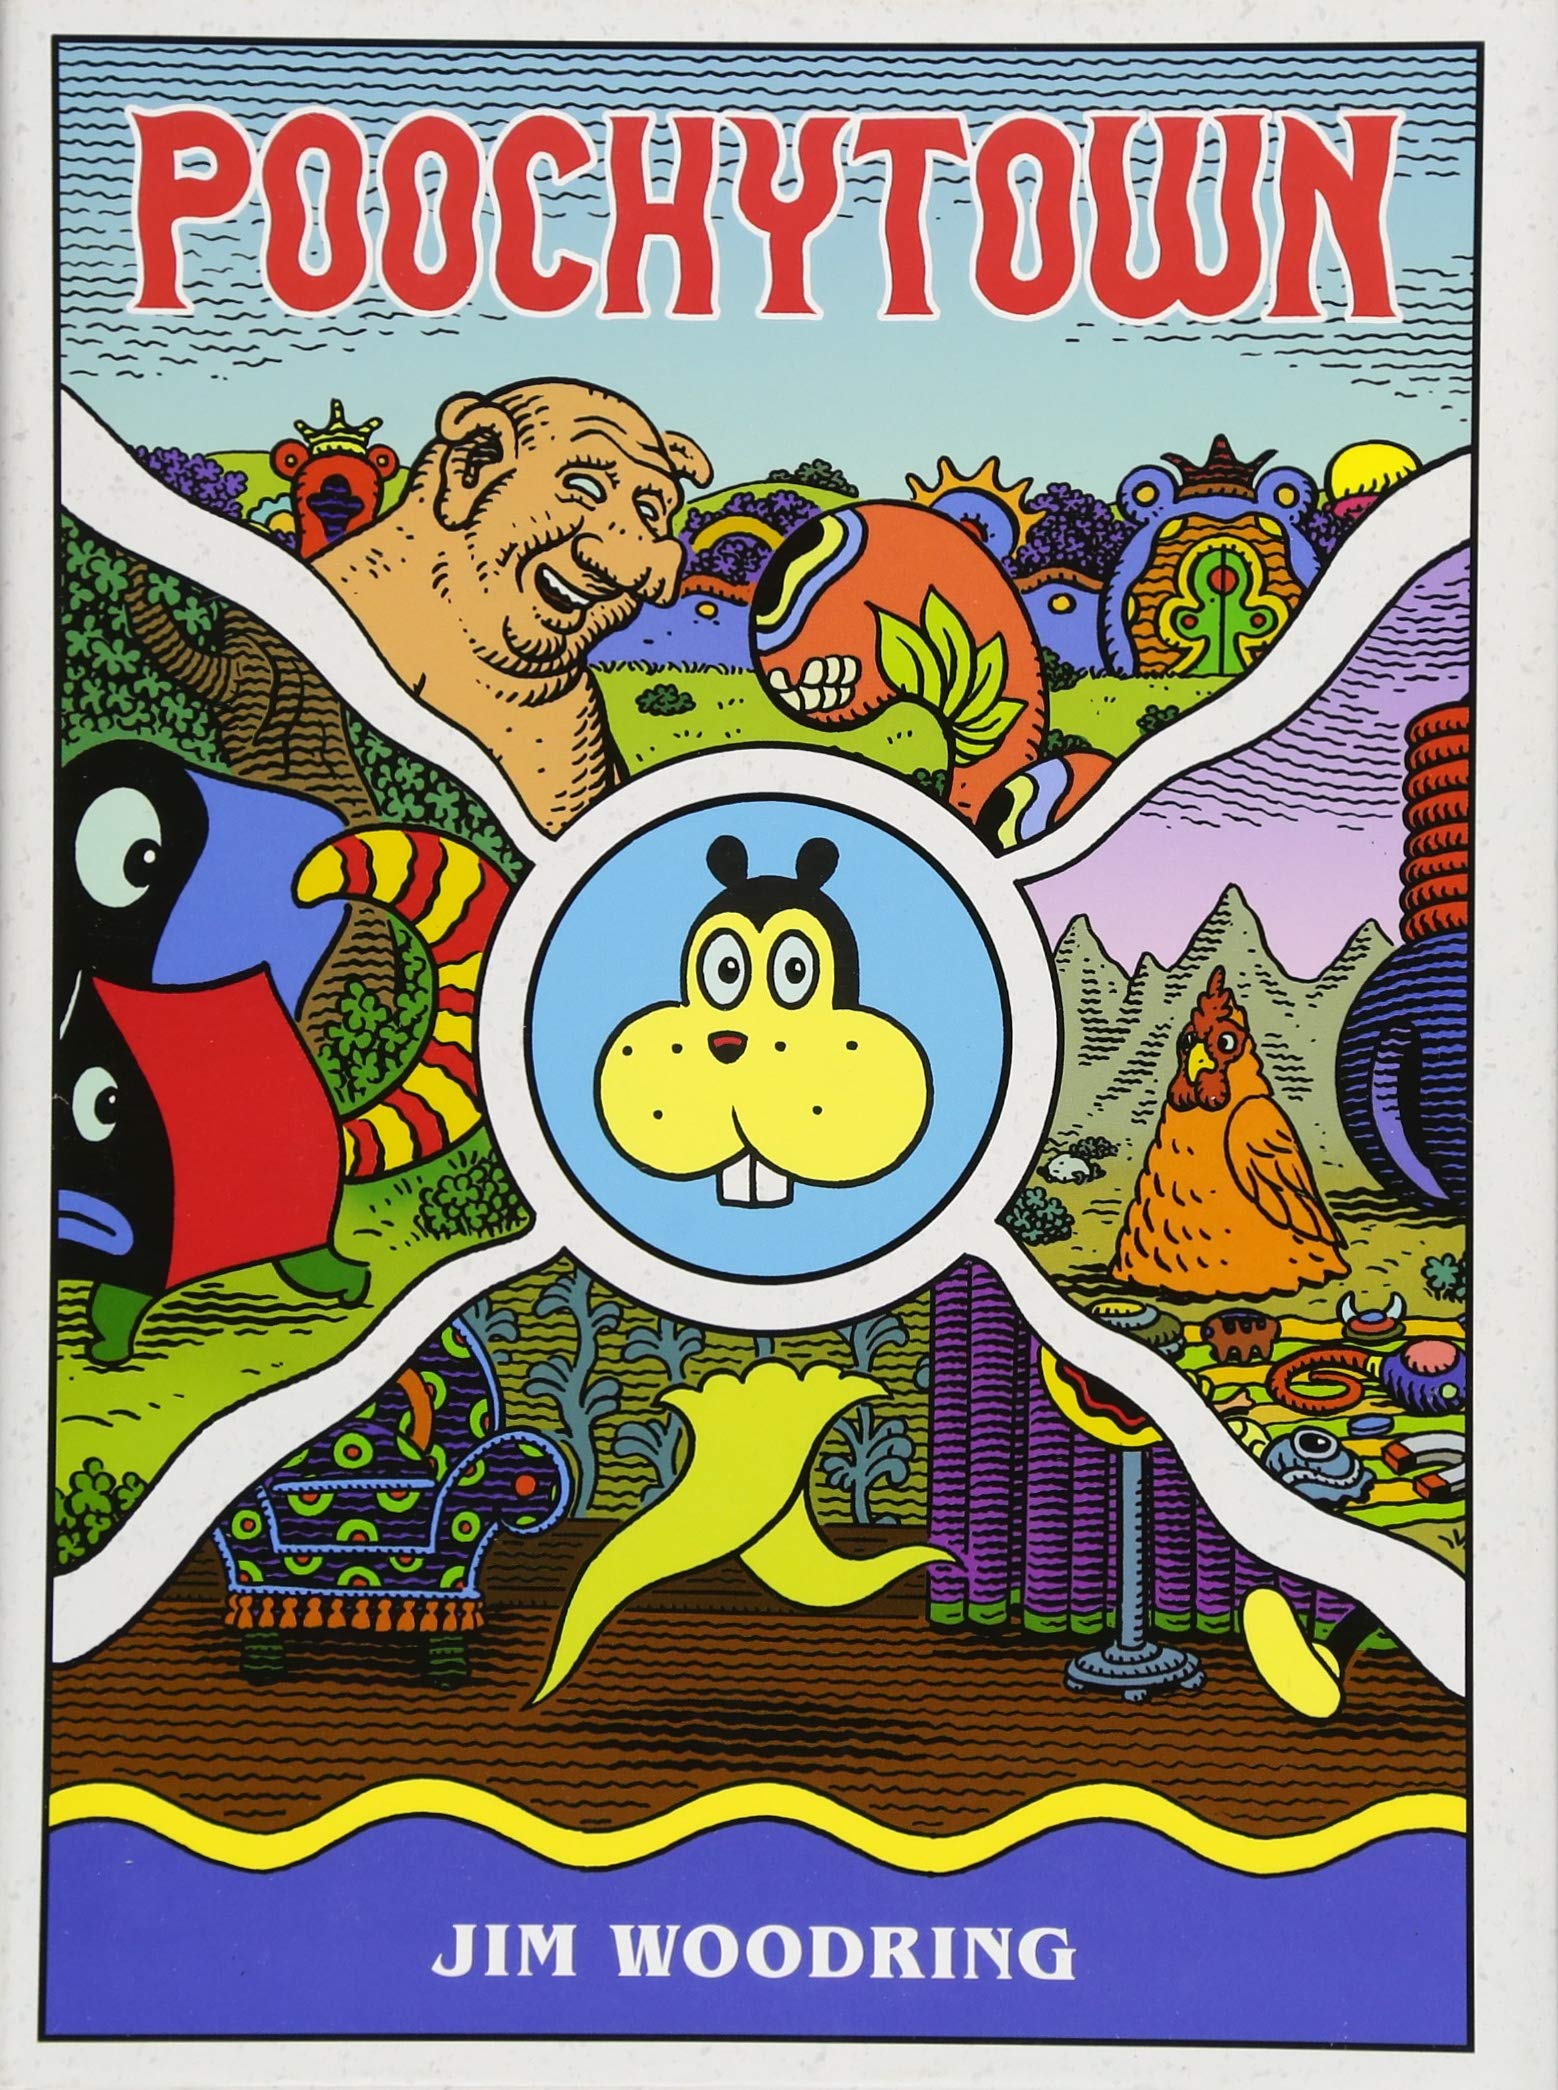 A book cover for Poochytown